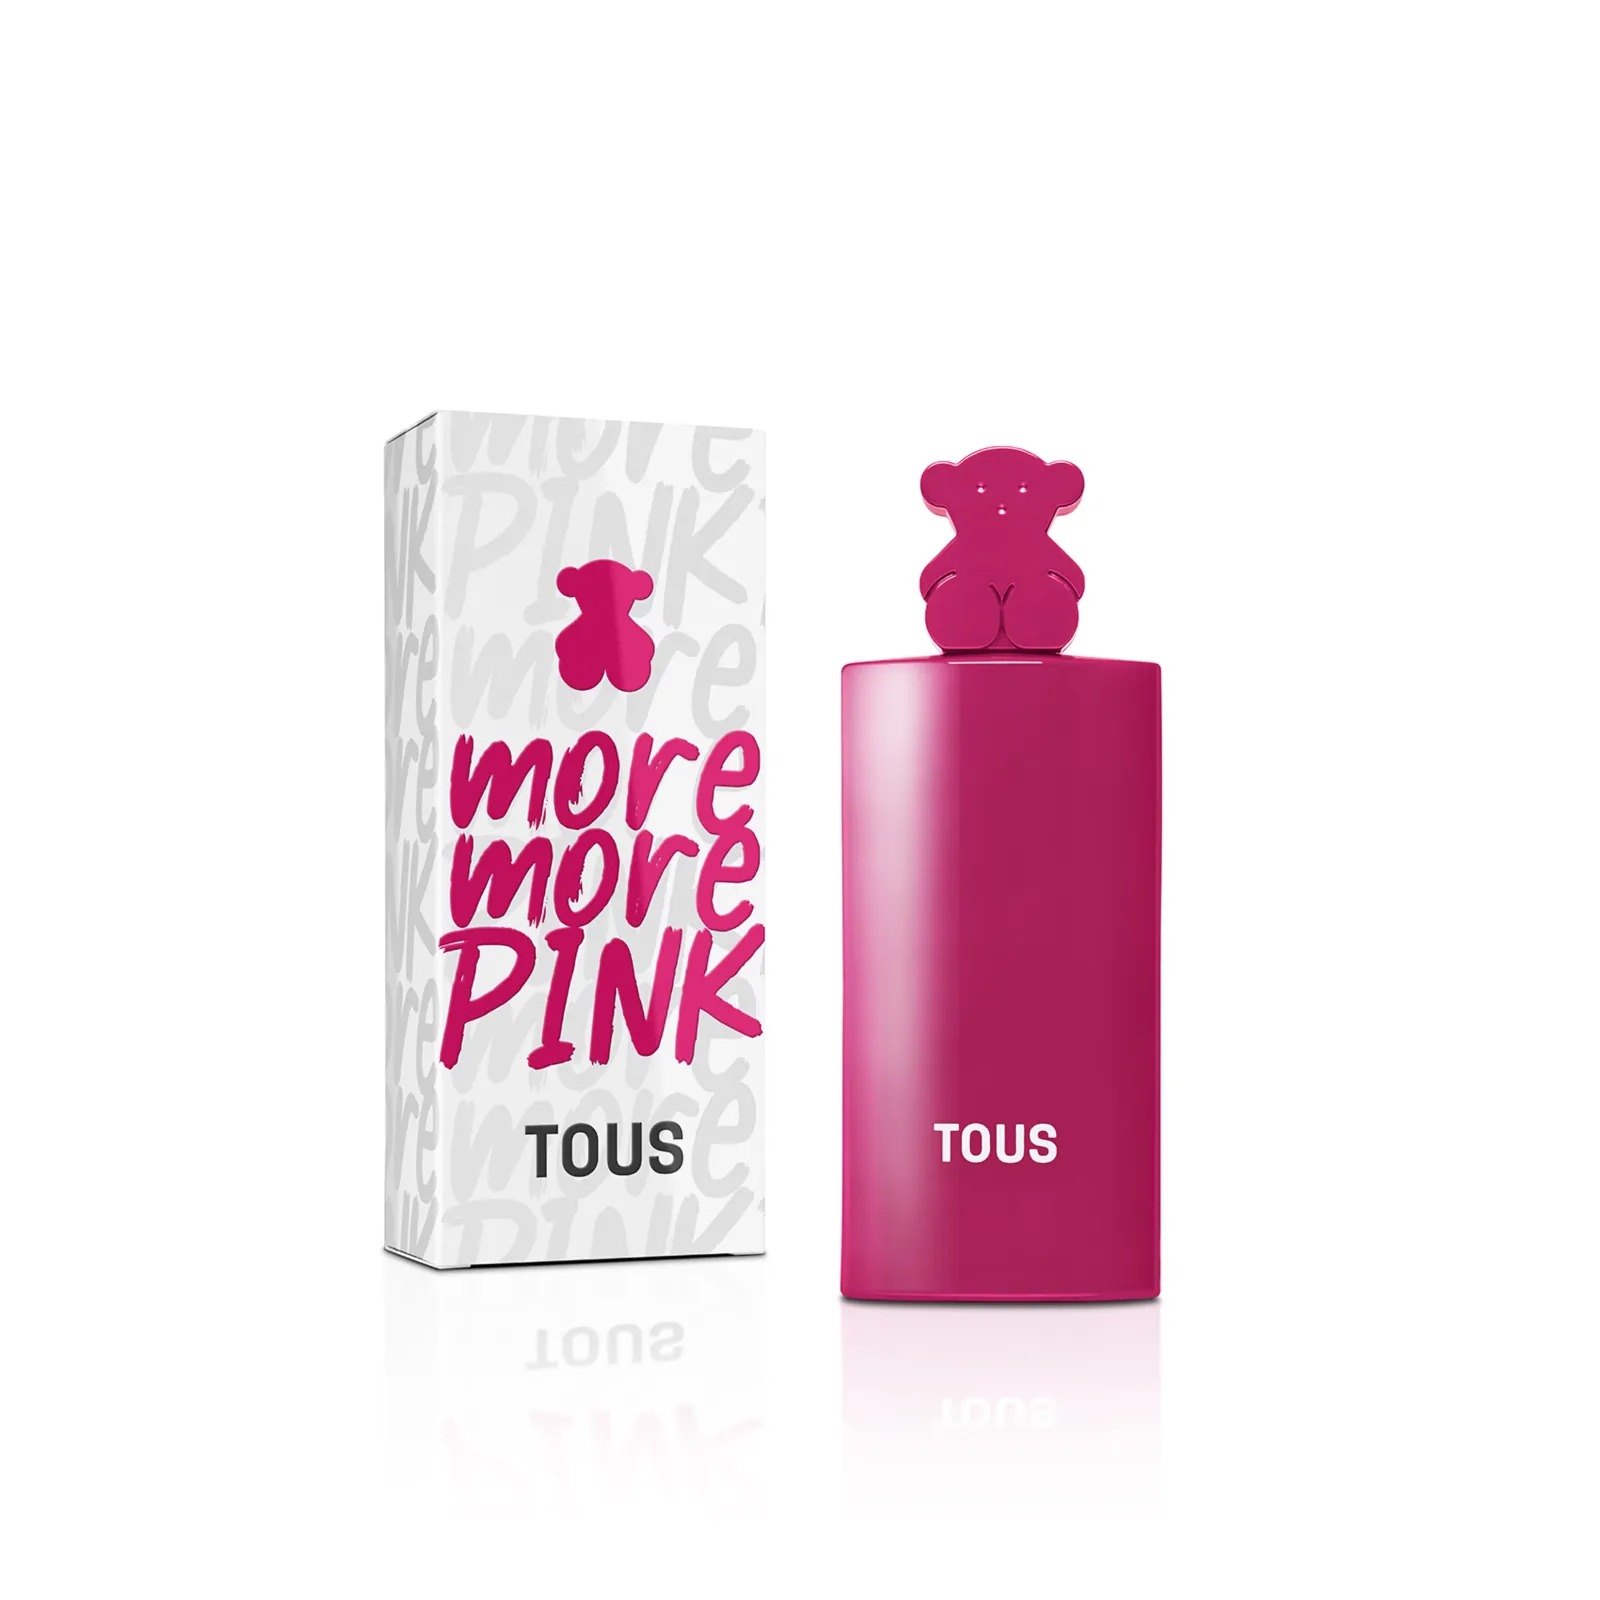 Tous Ladies More More Pink Edt 3.0 oz Fragrances 8436603331289 In Brown / Pink